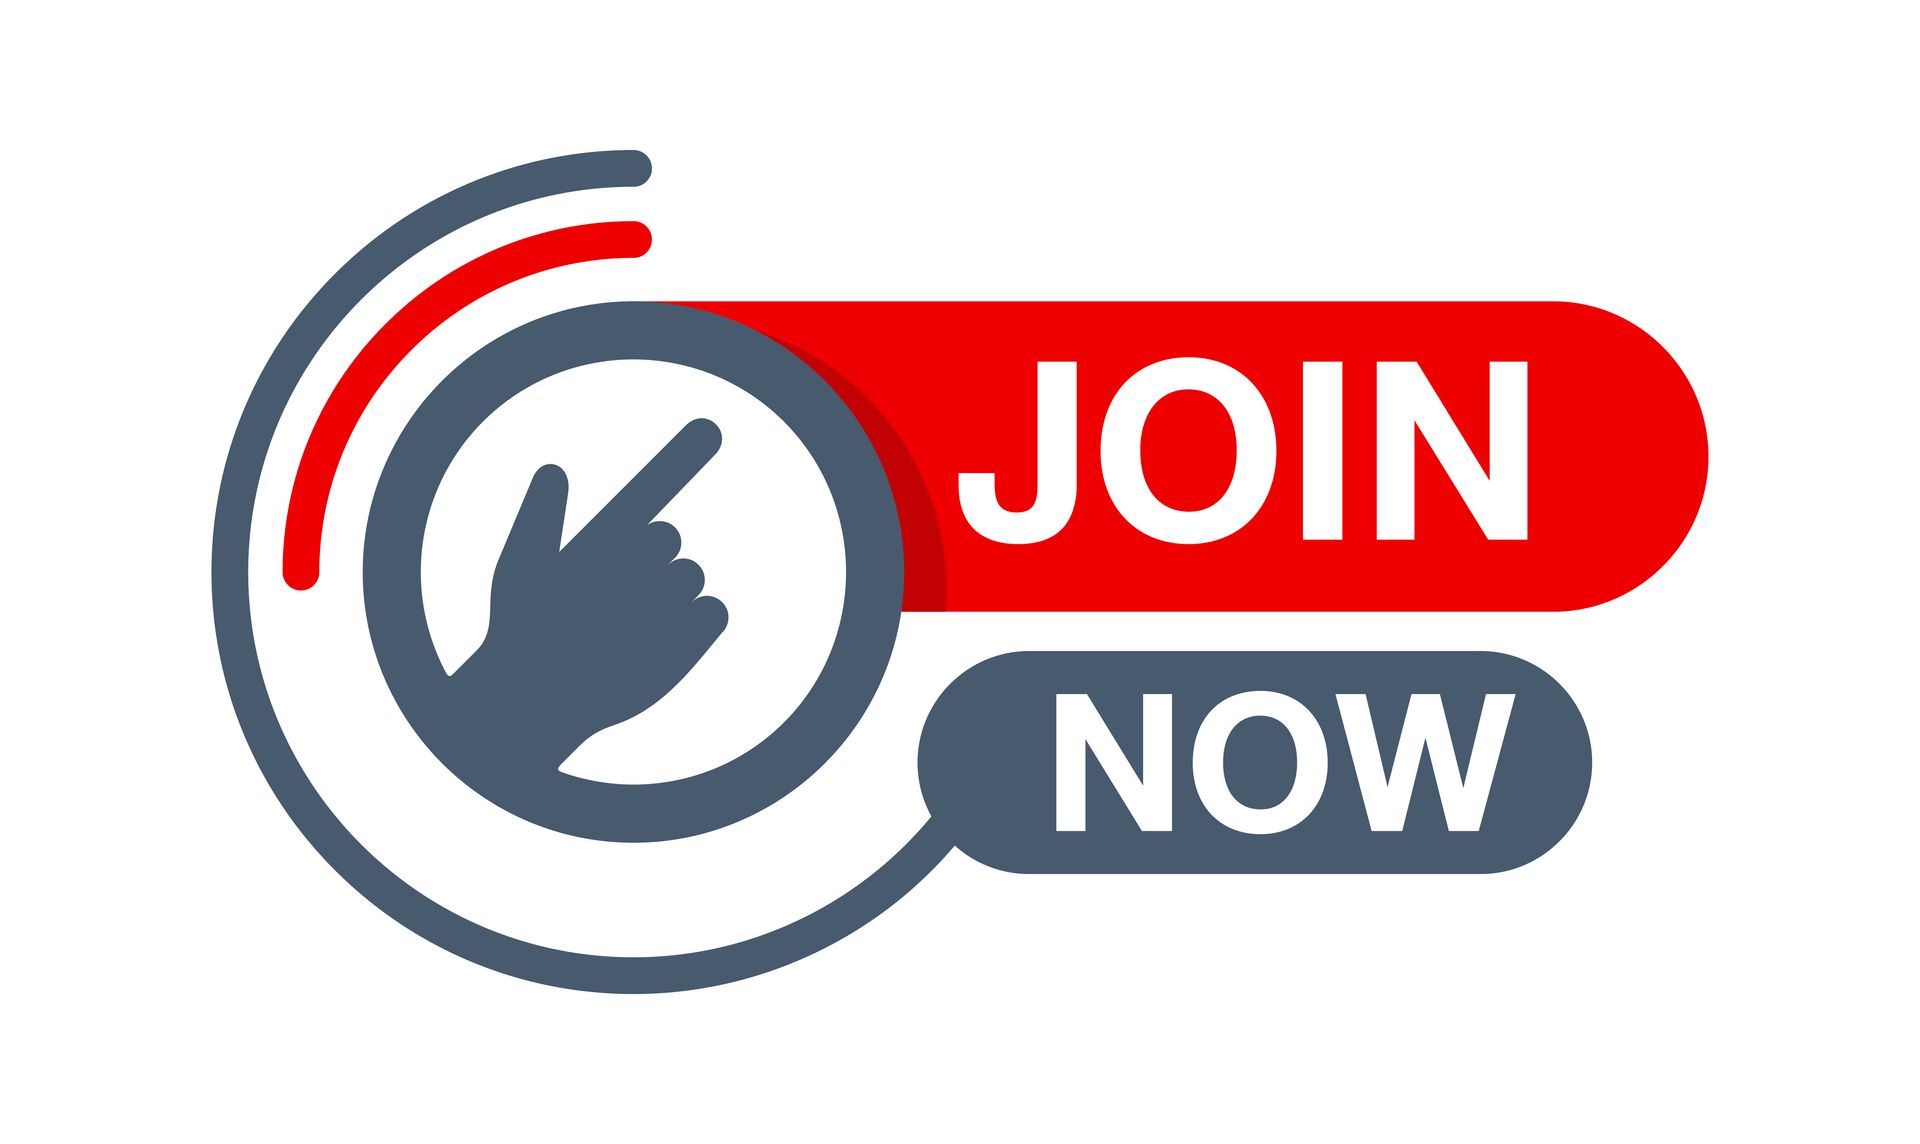 A red and gray sign that says `` join now '' with a hand pointing at it.